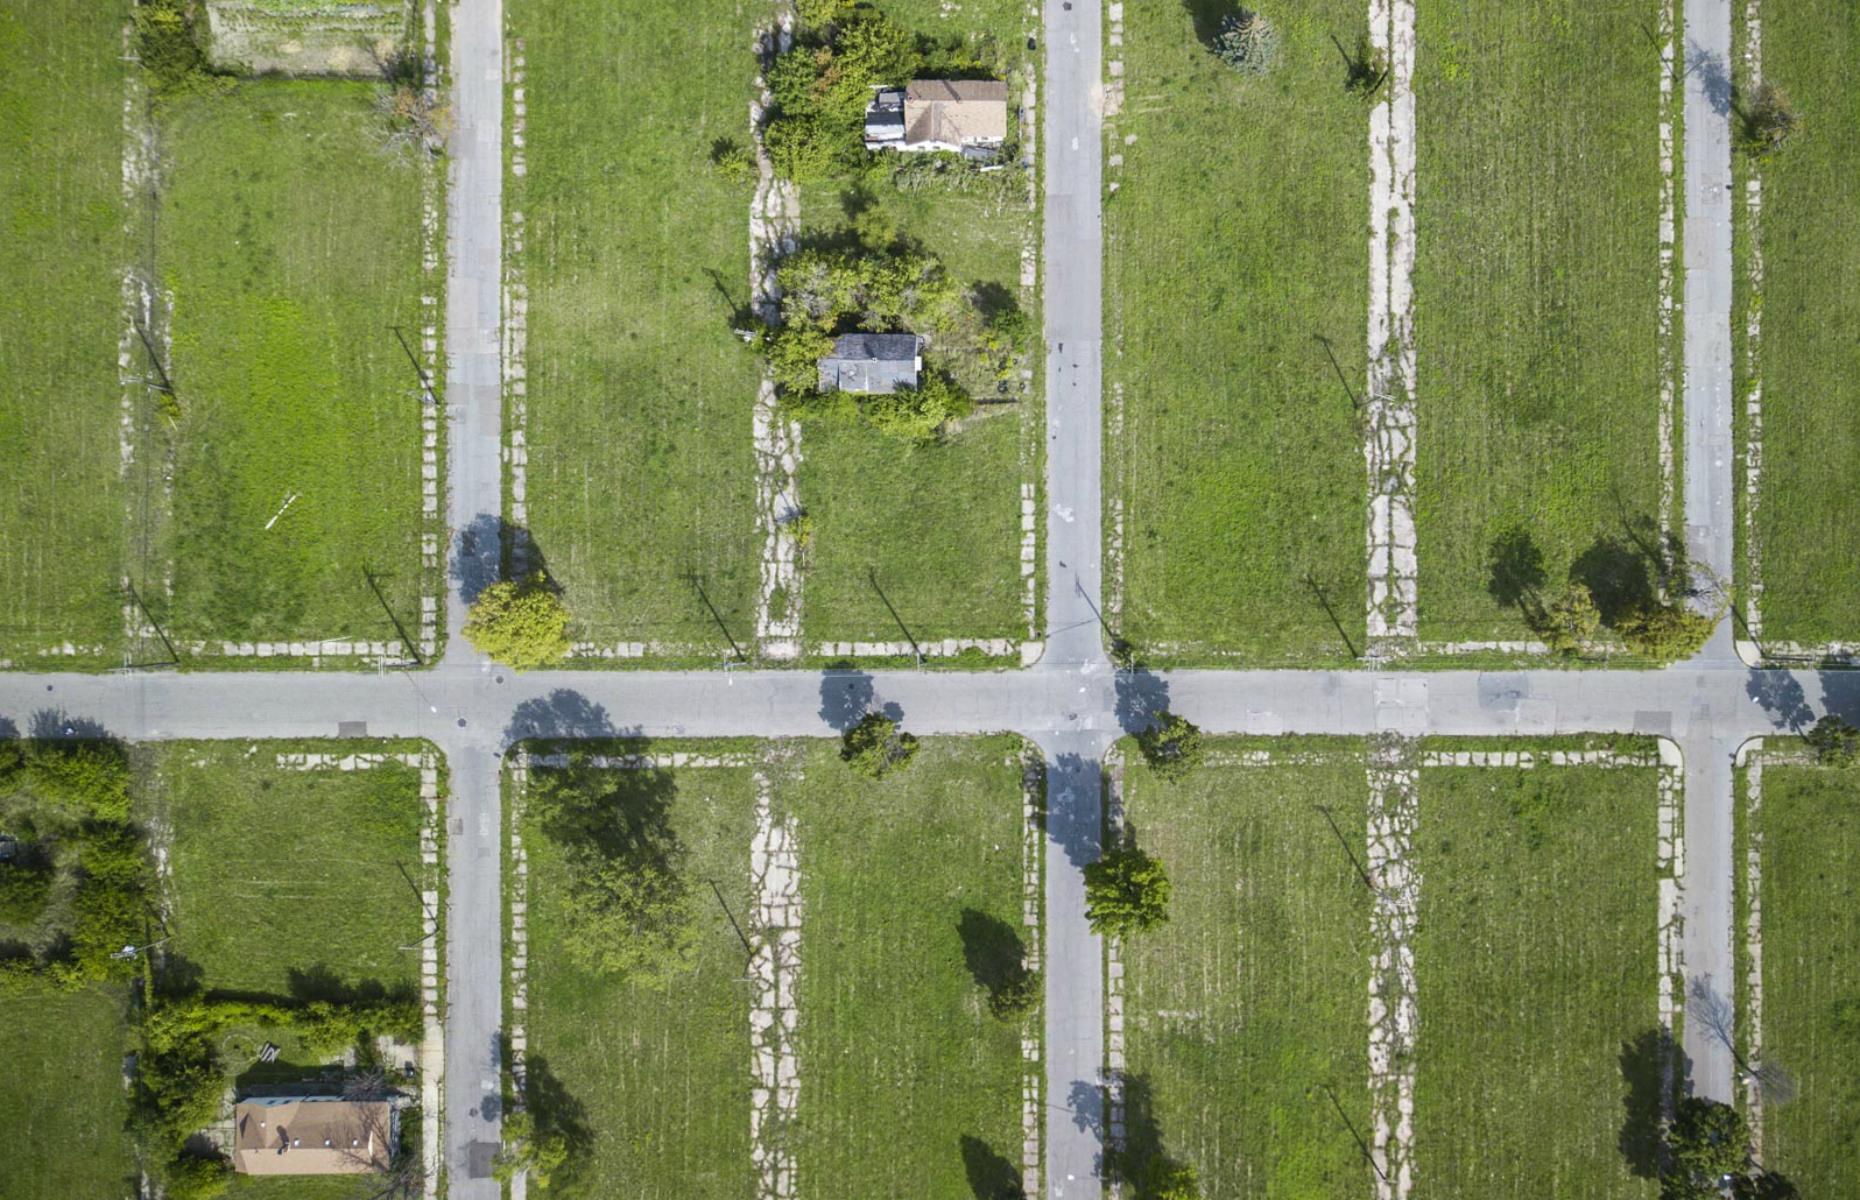 <p>Many areas in Detroit are almost lifeless in comparison to their past. Black Bottom, pictured, used to be a lively area, but has suffered from years of neglect. Now, like many areas of Detroit, these aerial images reveal the cracked concrete of its almost abandoned streets.</p>  <p><strong>Take a look at these <a href="https://www.lovemoney.com/news/86345/derelict-places-in-the-worlds-richest-cities">derelict places in the world's richest cities</a></strong></p>